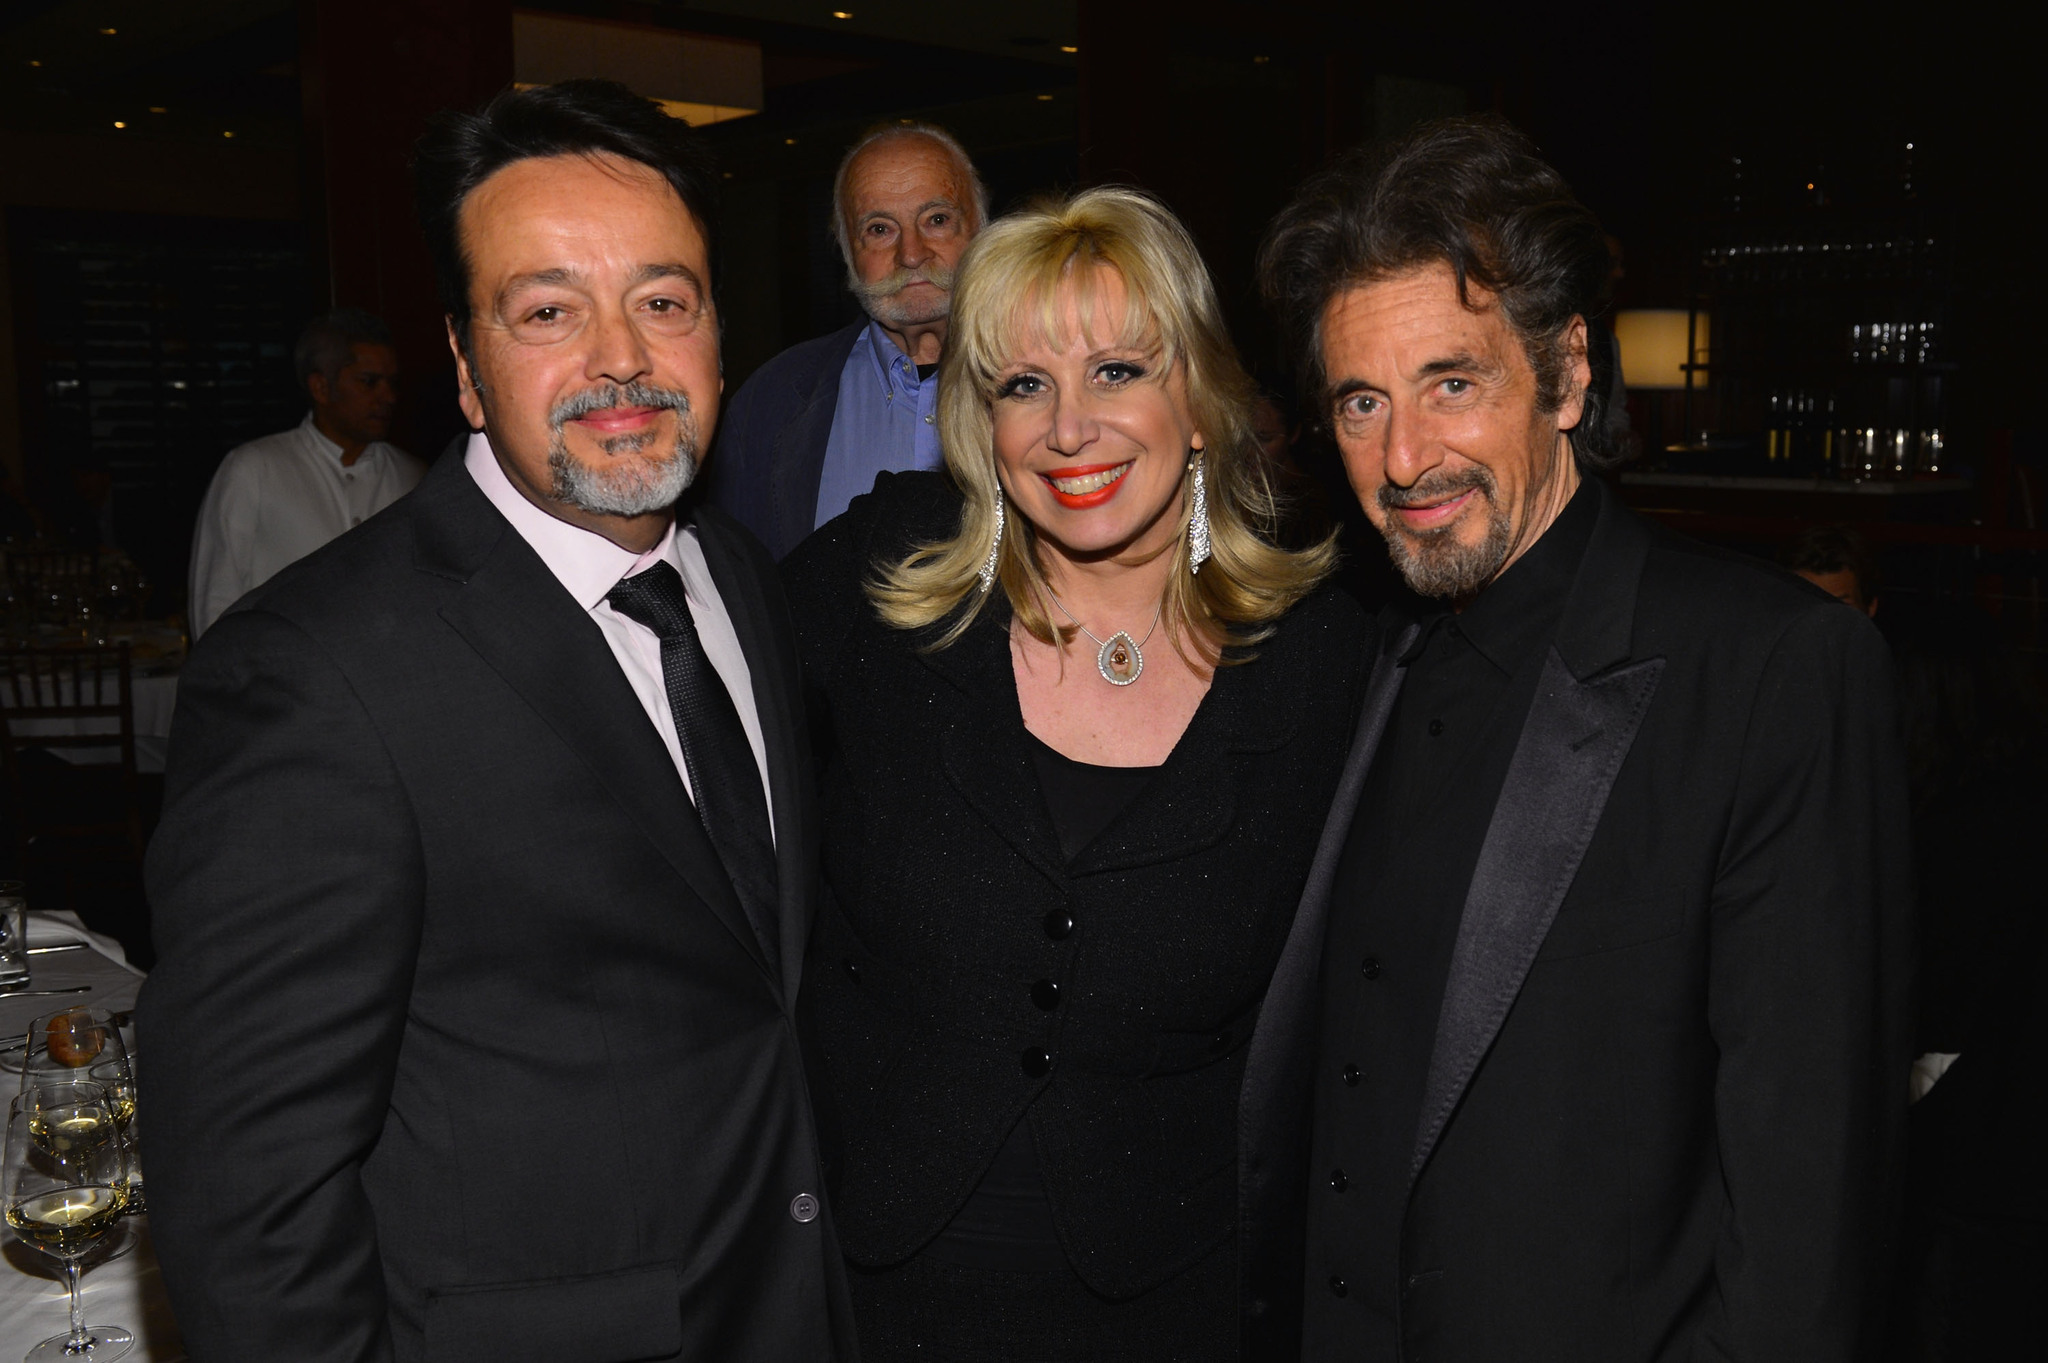 HBO Films president Len Amato, Linda Kenney Baden, and actor Al Pacino attend the after party for the 